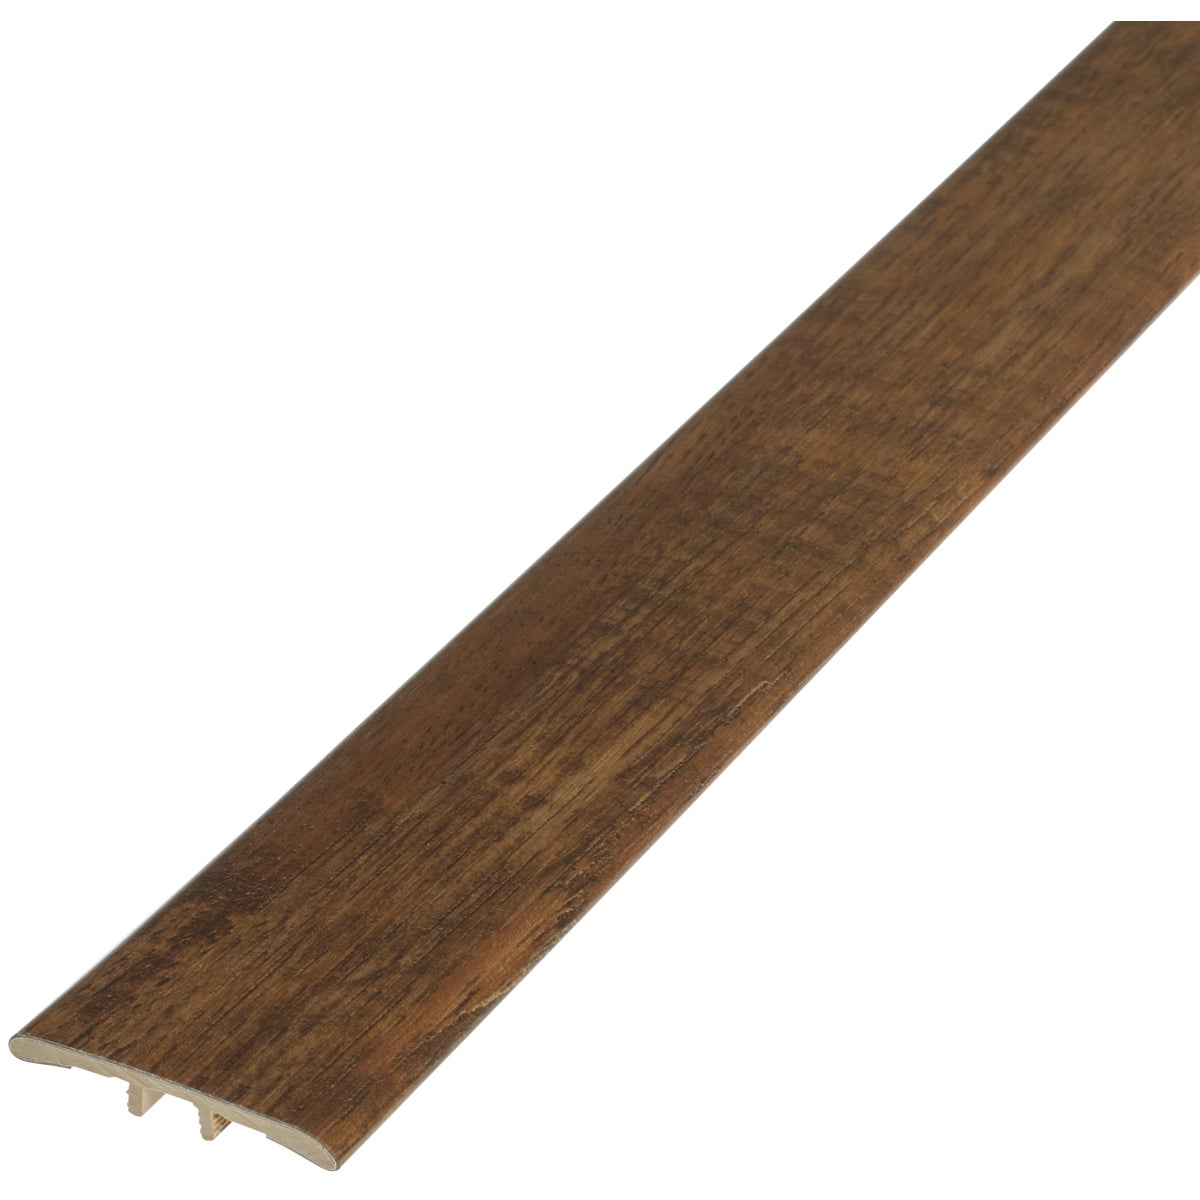 Shaw Impact Weathered Barnboard 1-3/4 In. W x 94 In. L T Mold Vinyl Floor Plank Trim